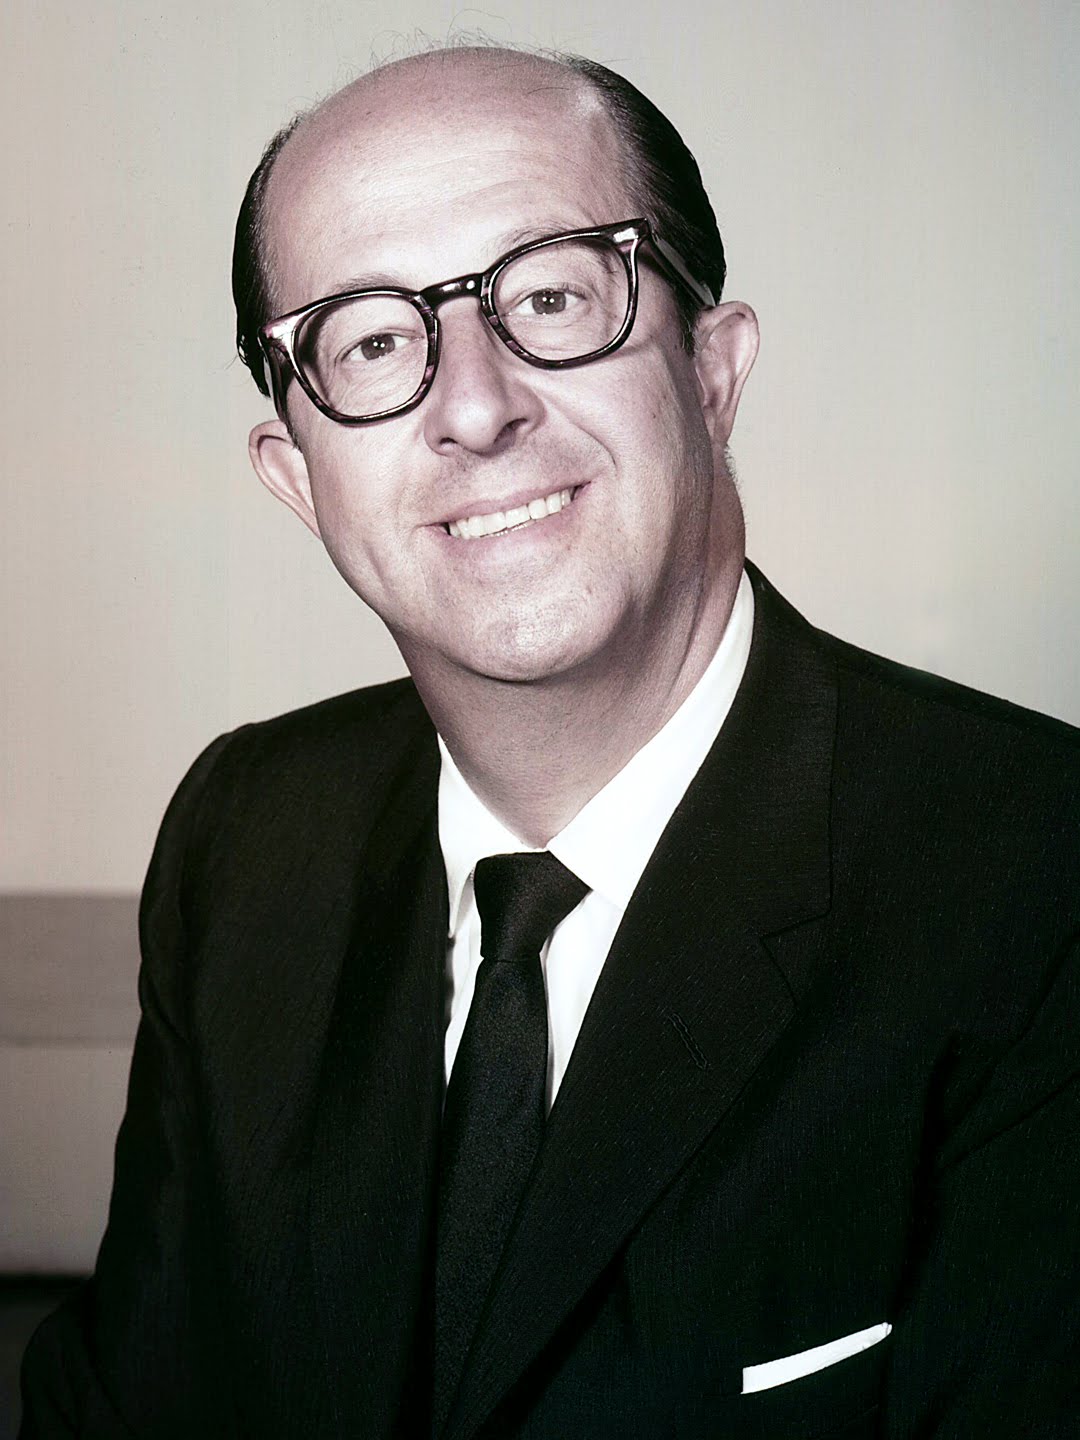 How tall is Phil Silvers?